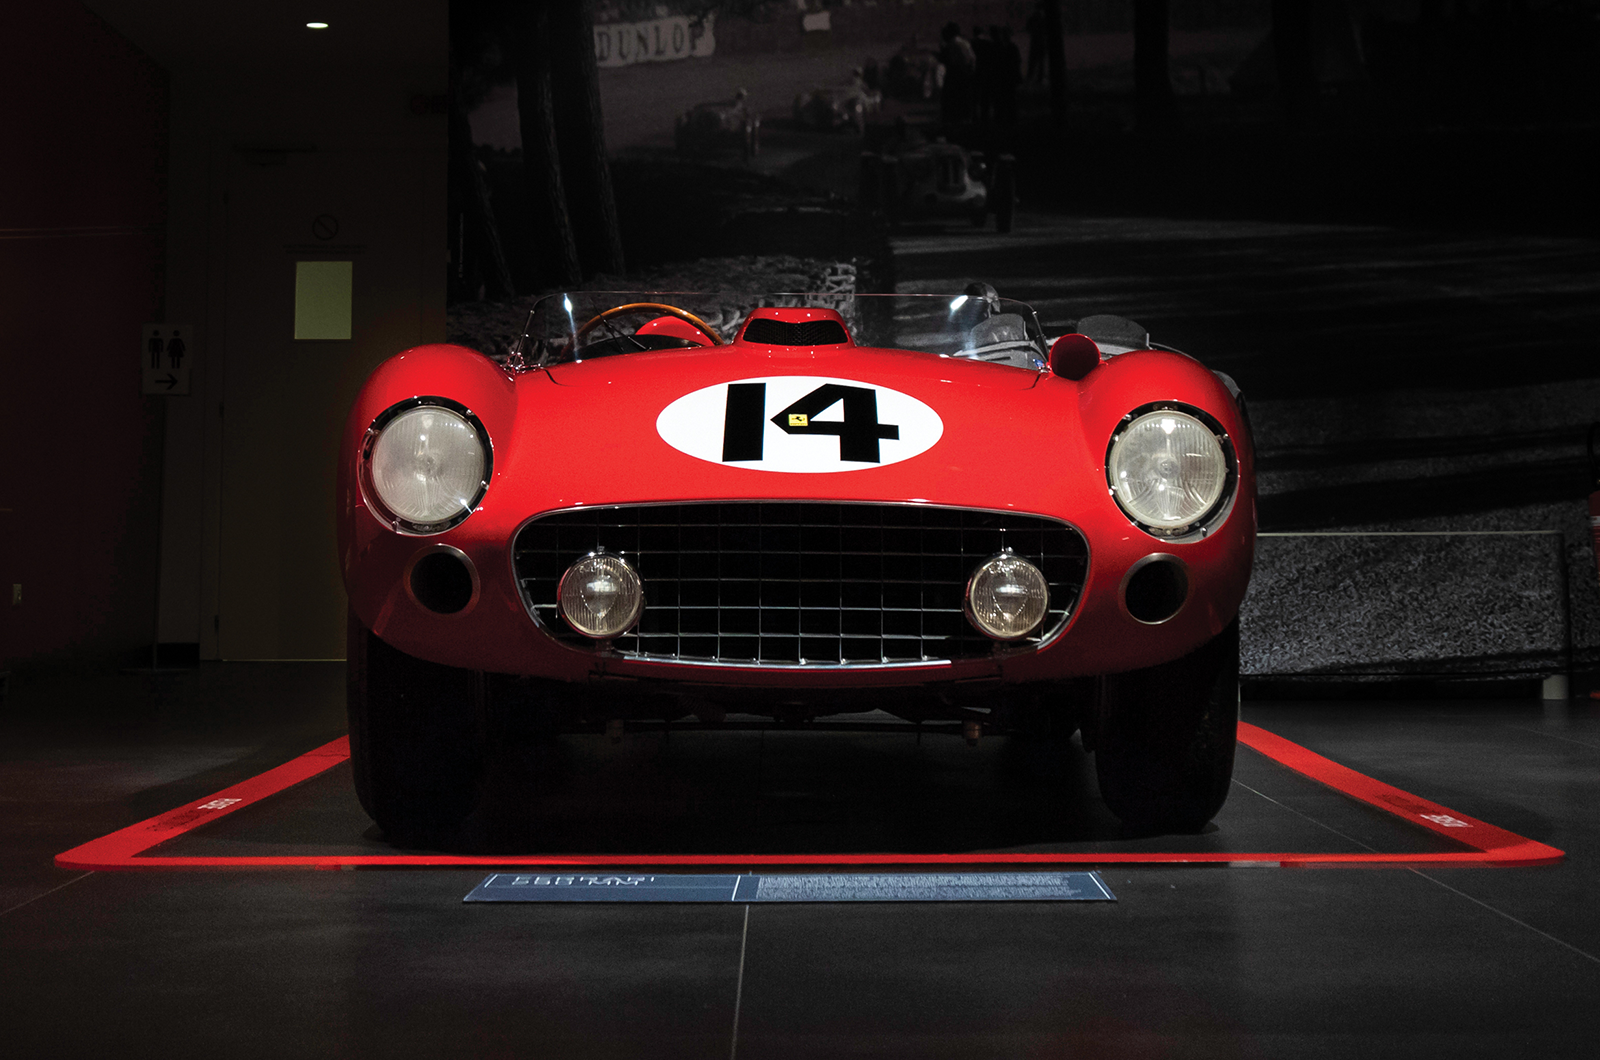 Classic & Sports Car – Yours for £20m: Ferrari 290 MM raced by Fangio and Moss